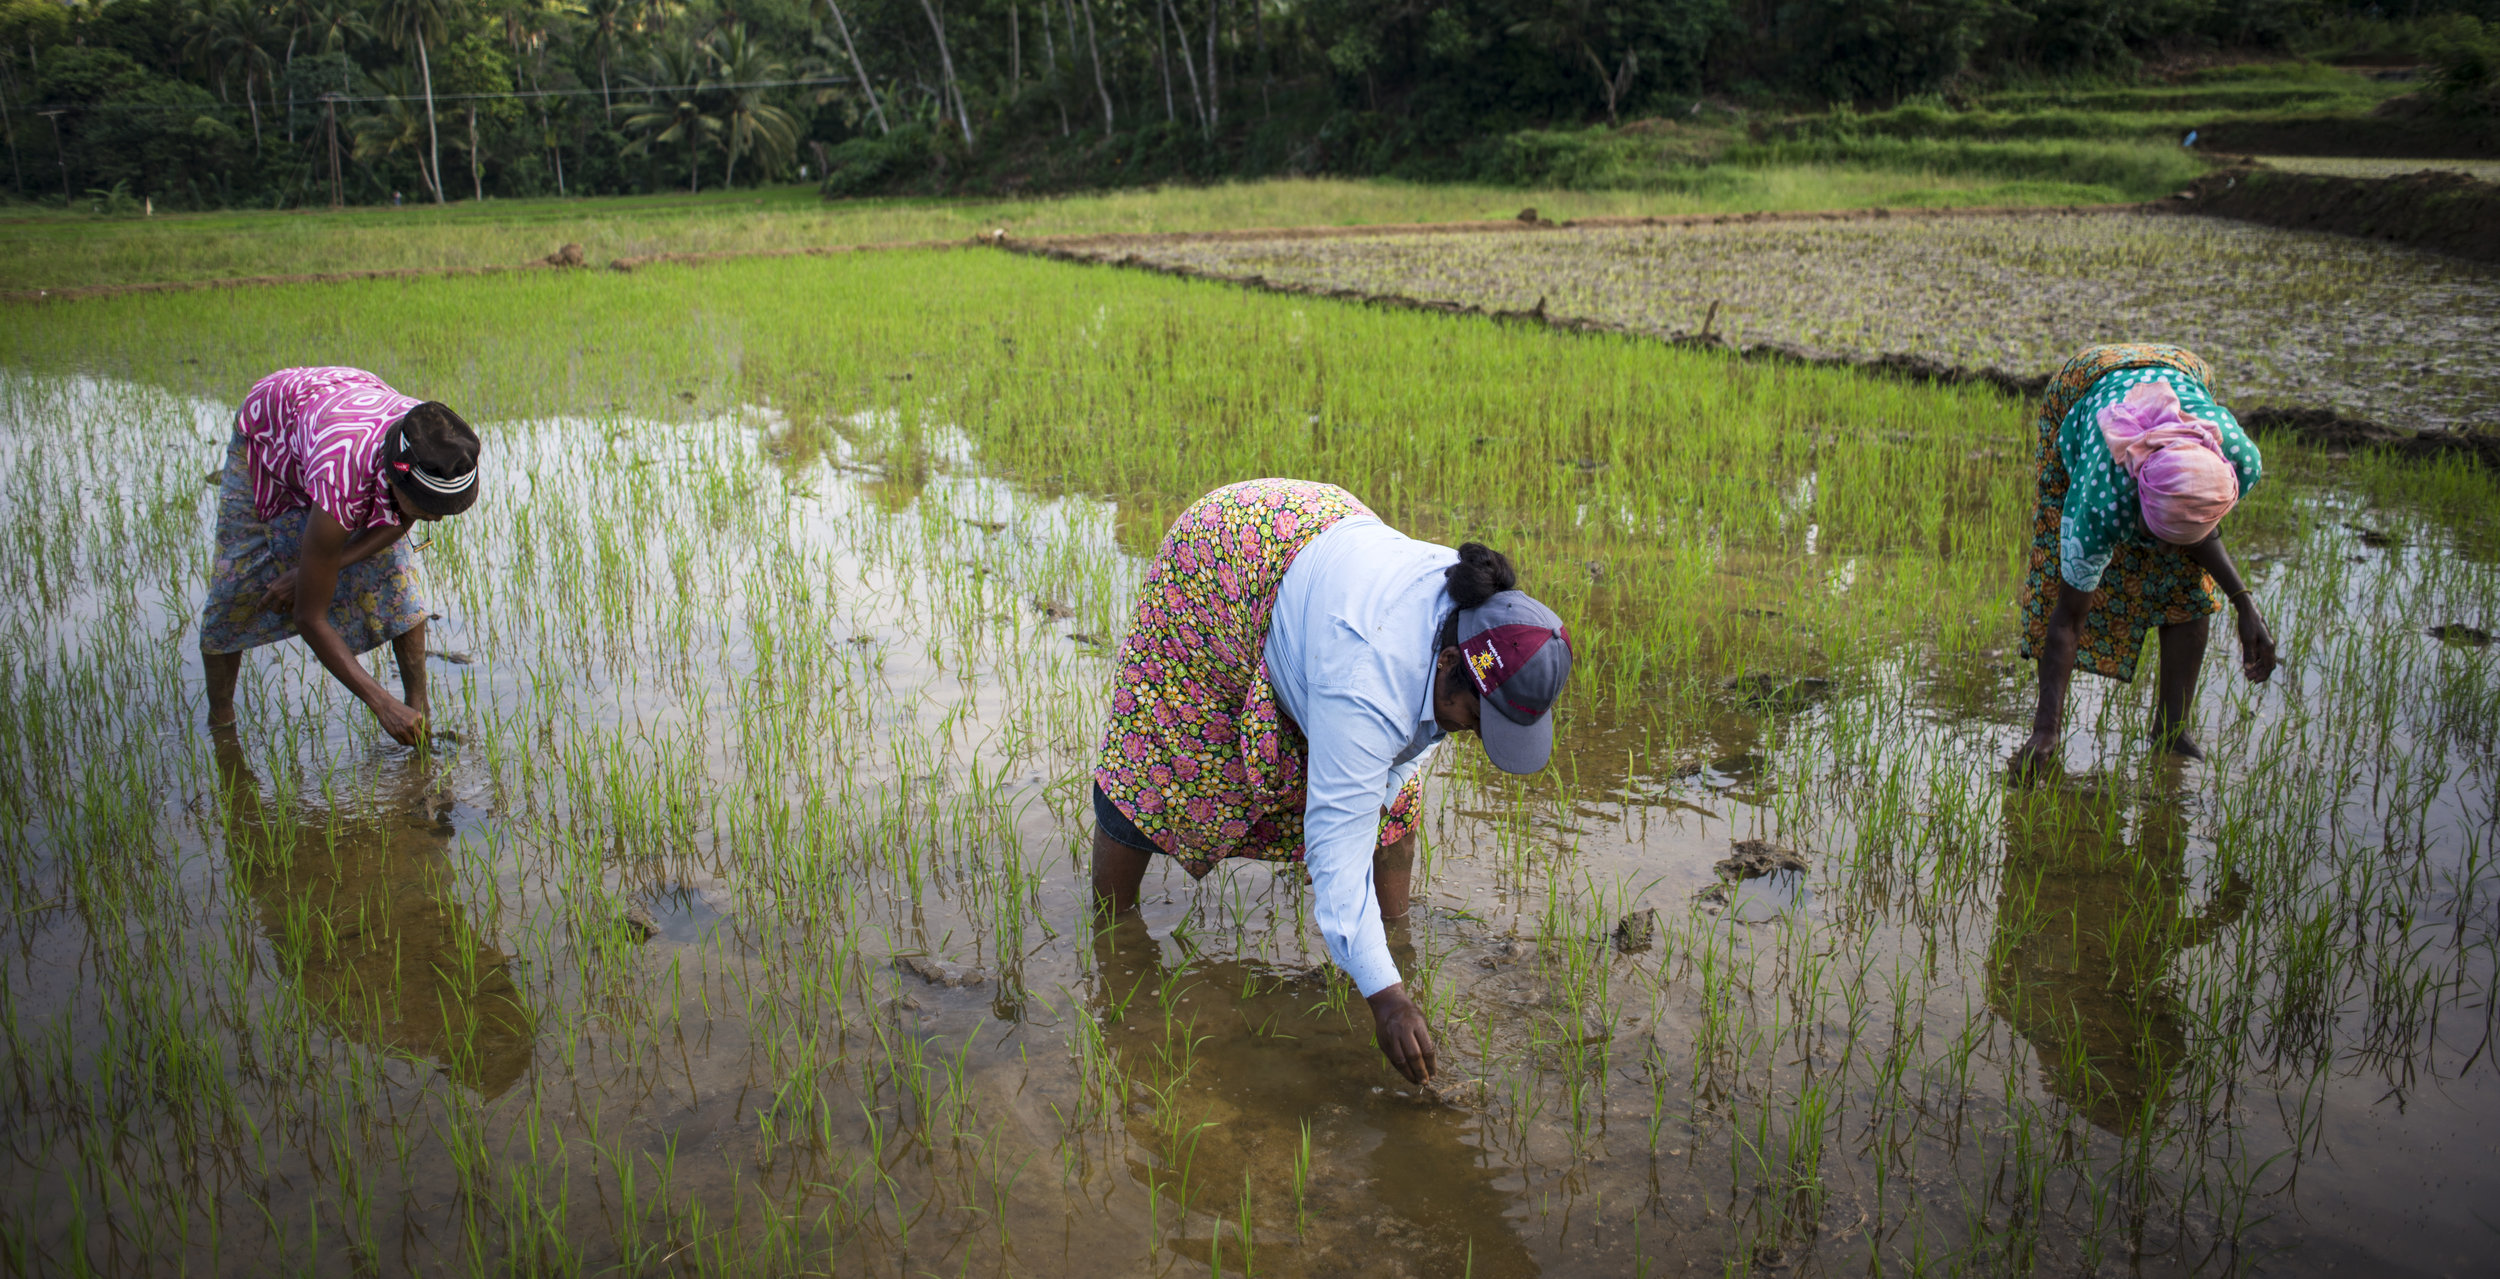  Rice is extremely sensitive to water shortage. Therefore in hilly landscapes, the land is terraced to help keep cultivation planes flooded and crops healthy. 